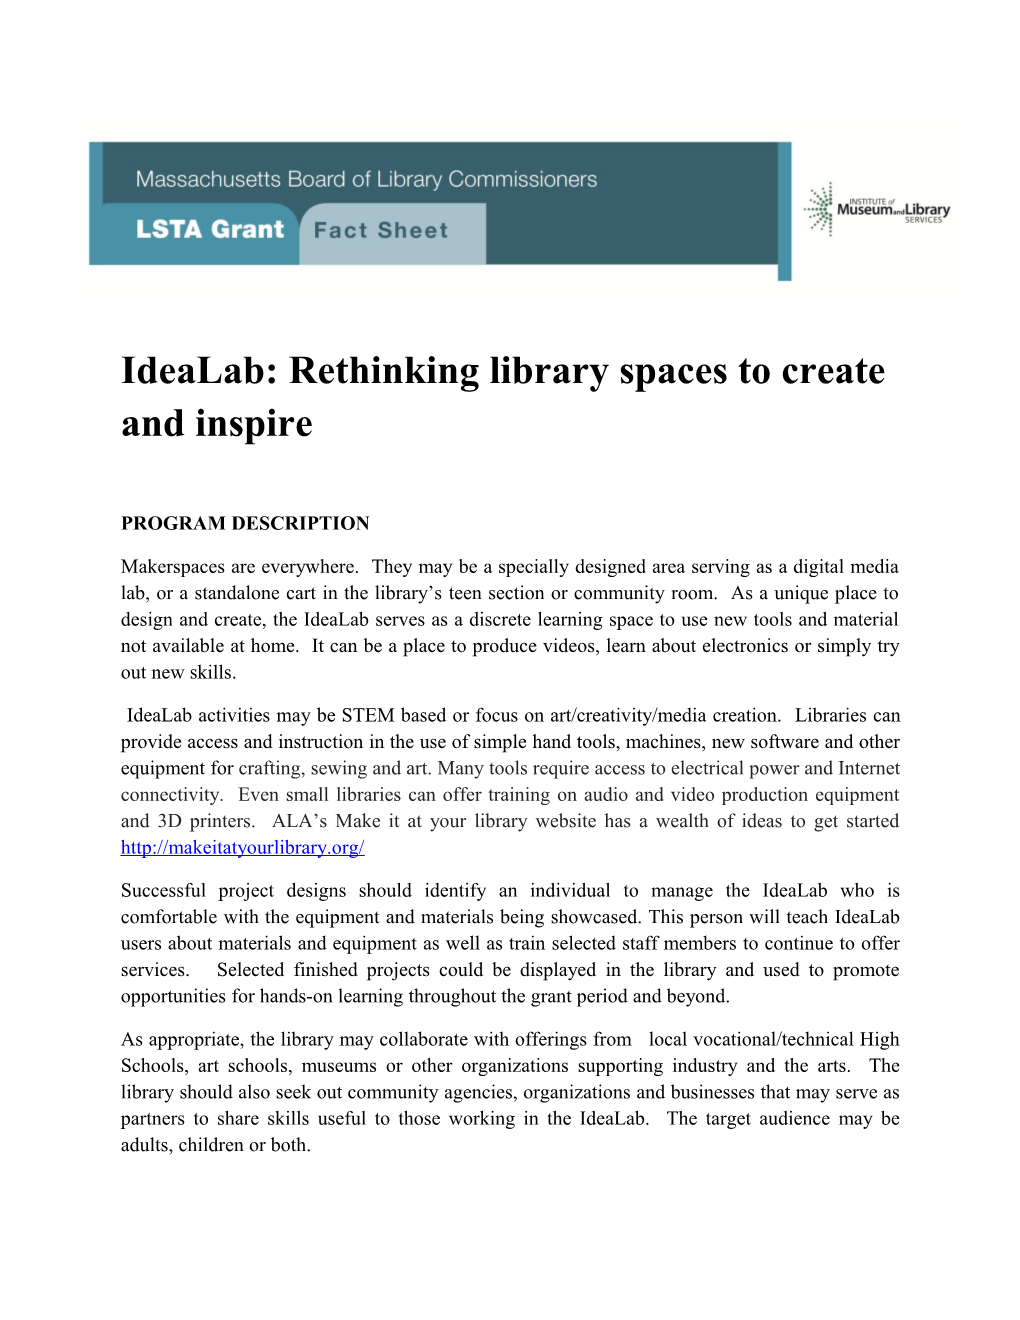 Idealab: Rethinking Library Spaces to Create and Inspire - FY19 LSTA Grant Round Fact Sheet